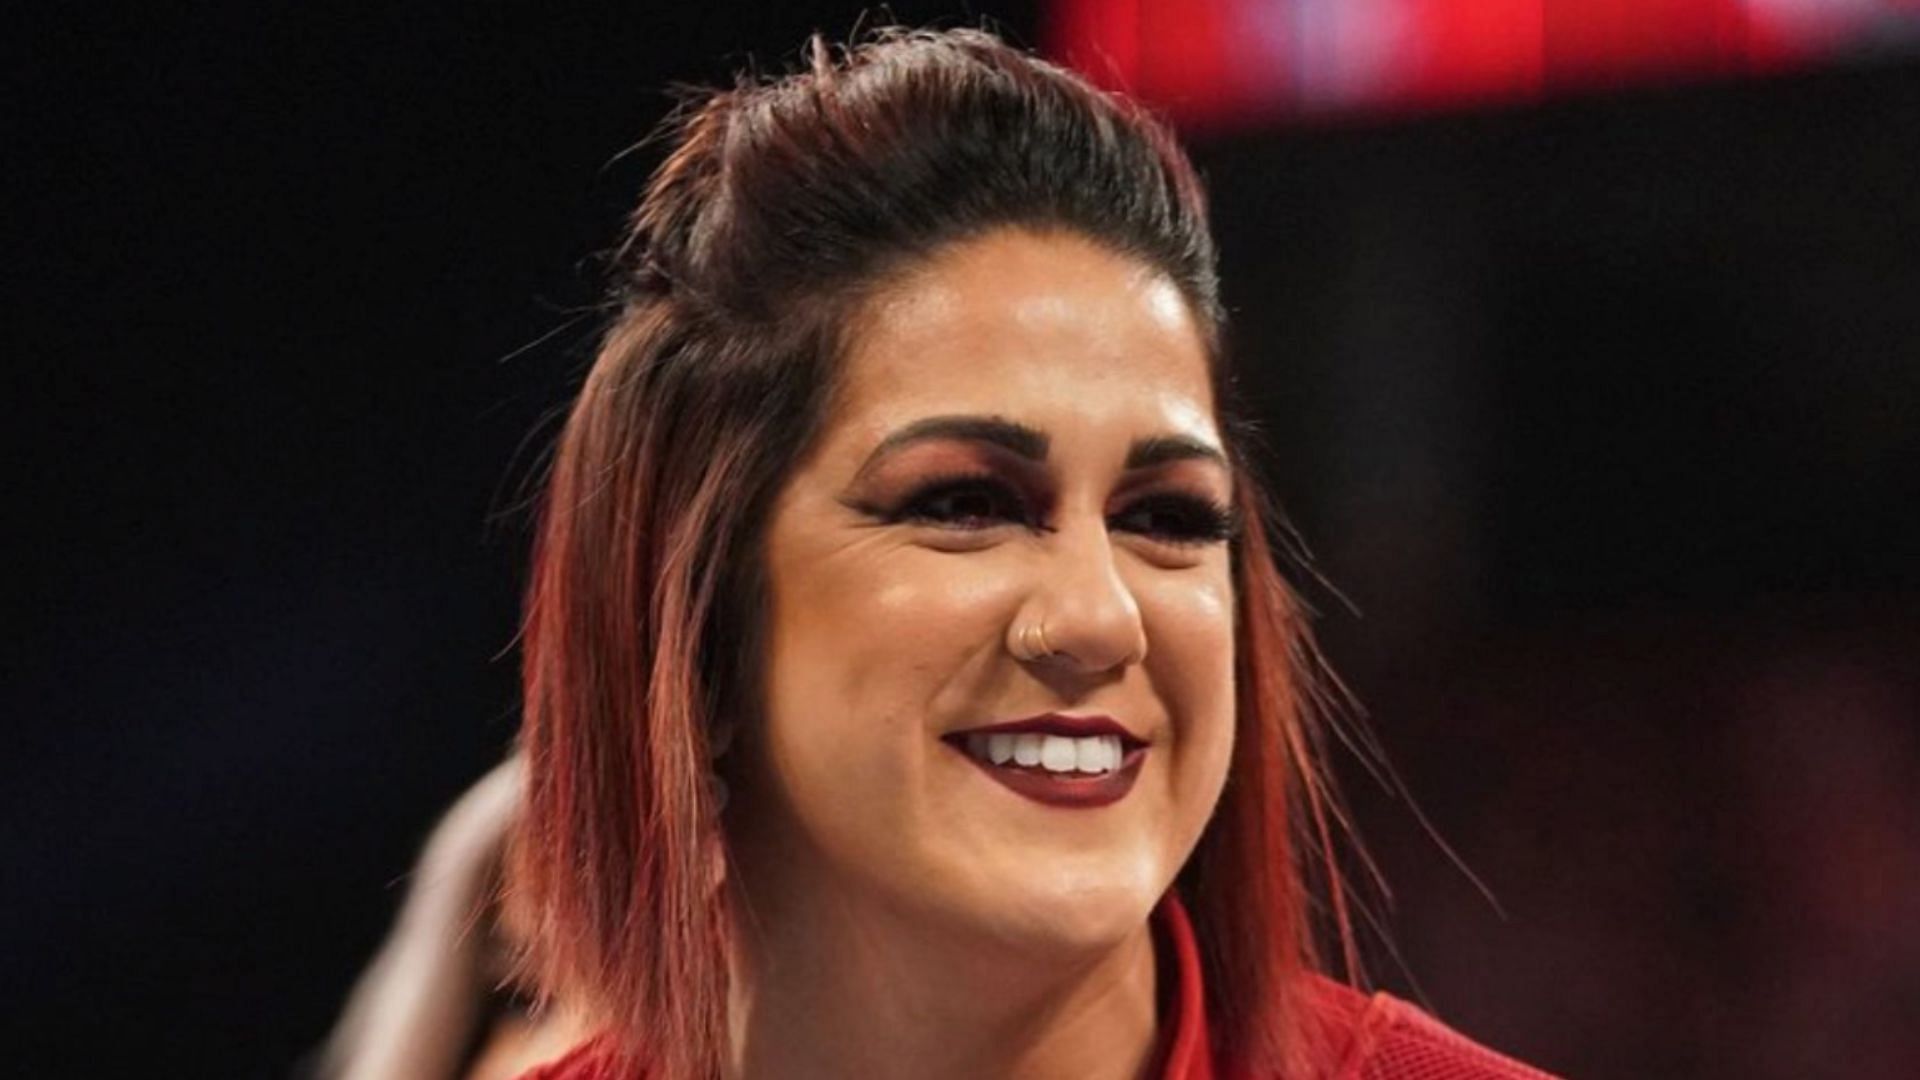 WWE Superstar Bayley during an episode of RAW